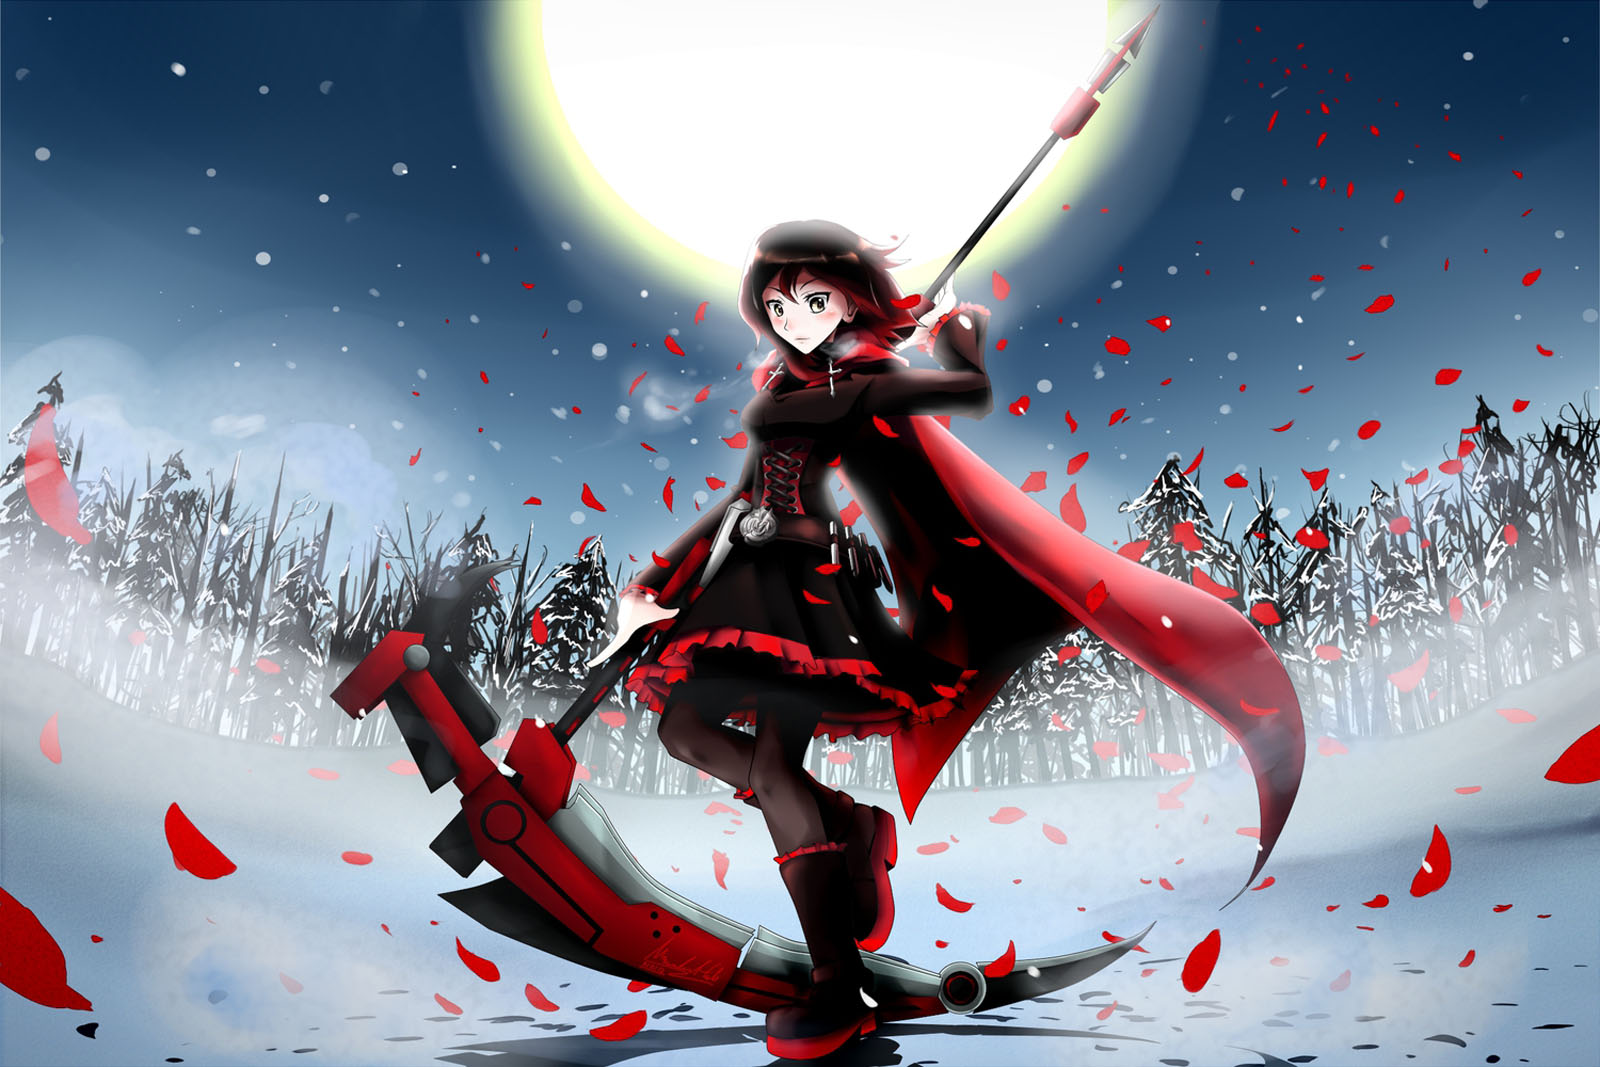 Mobile wallpaper Anime Cape Rwby Ruby Rose Rwby Lunging 673394  download the picture for free